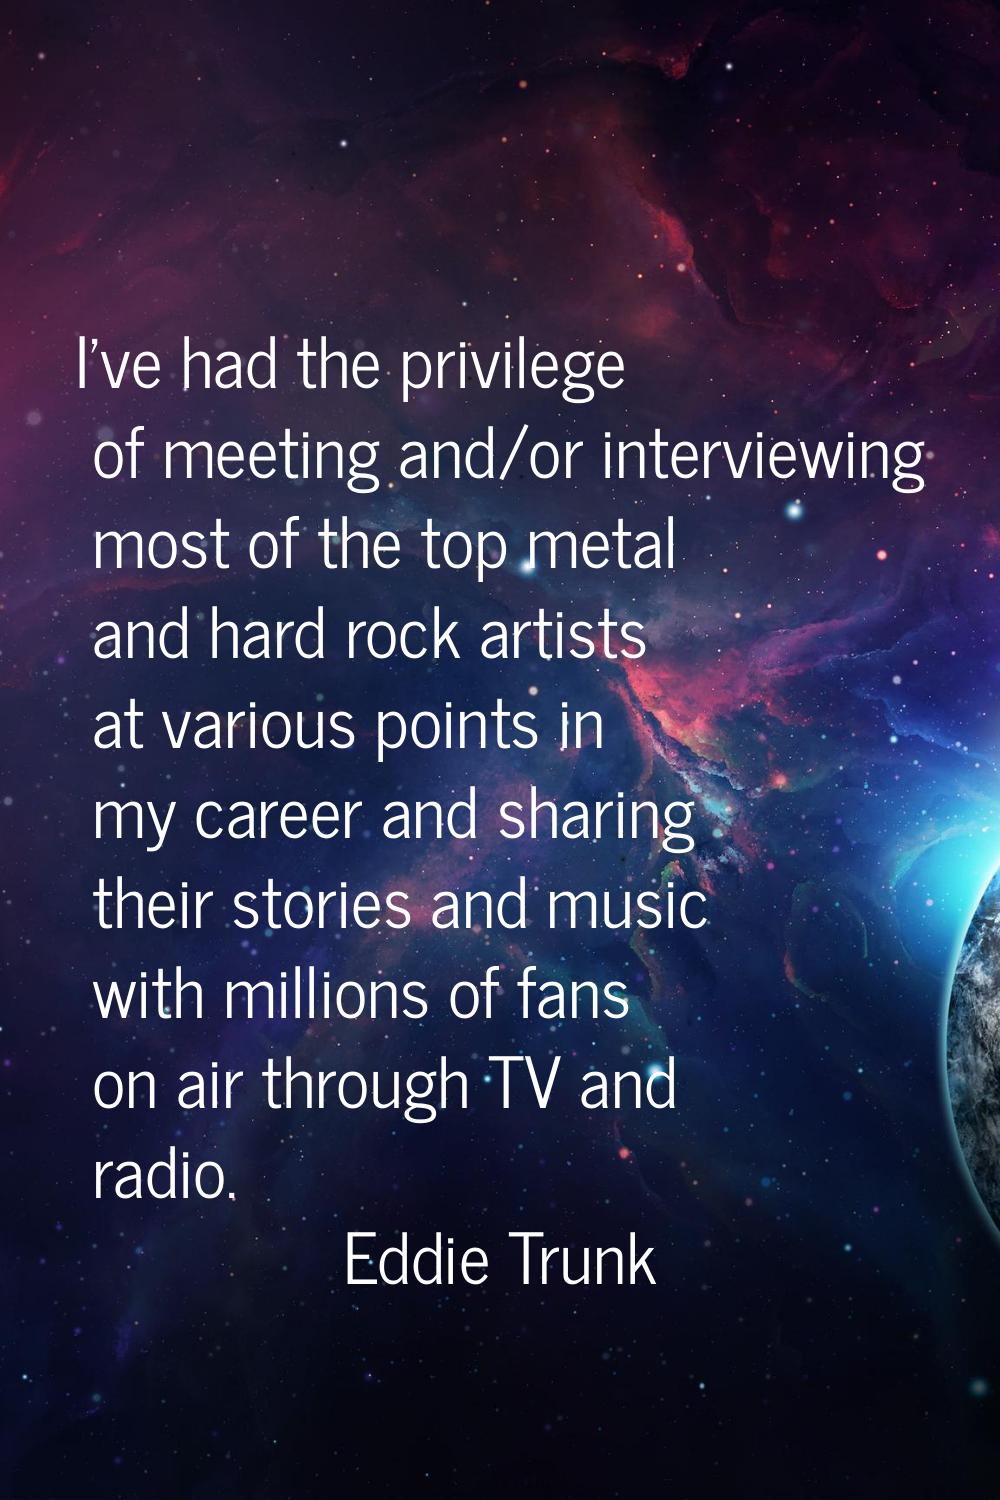 I've had the privilege of meeting and/or interviewing most of the top metal and hard rock artists a